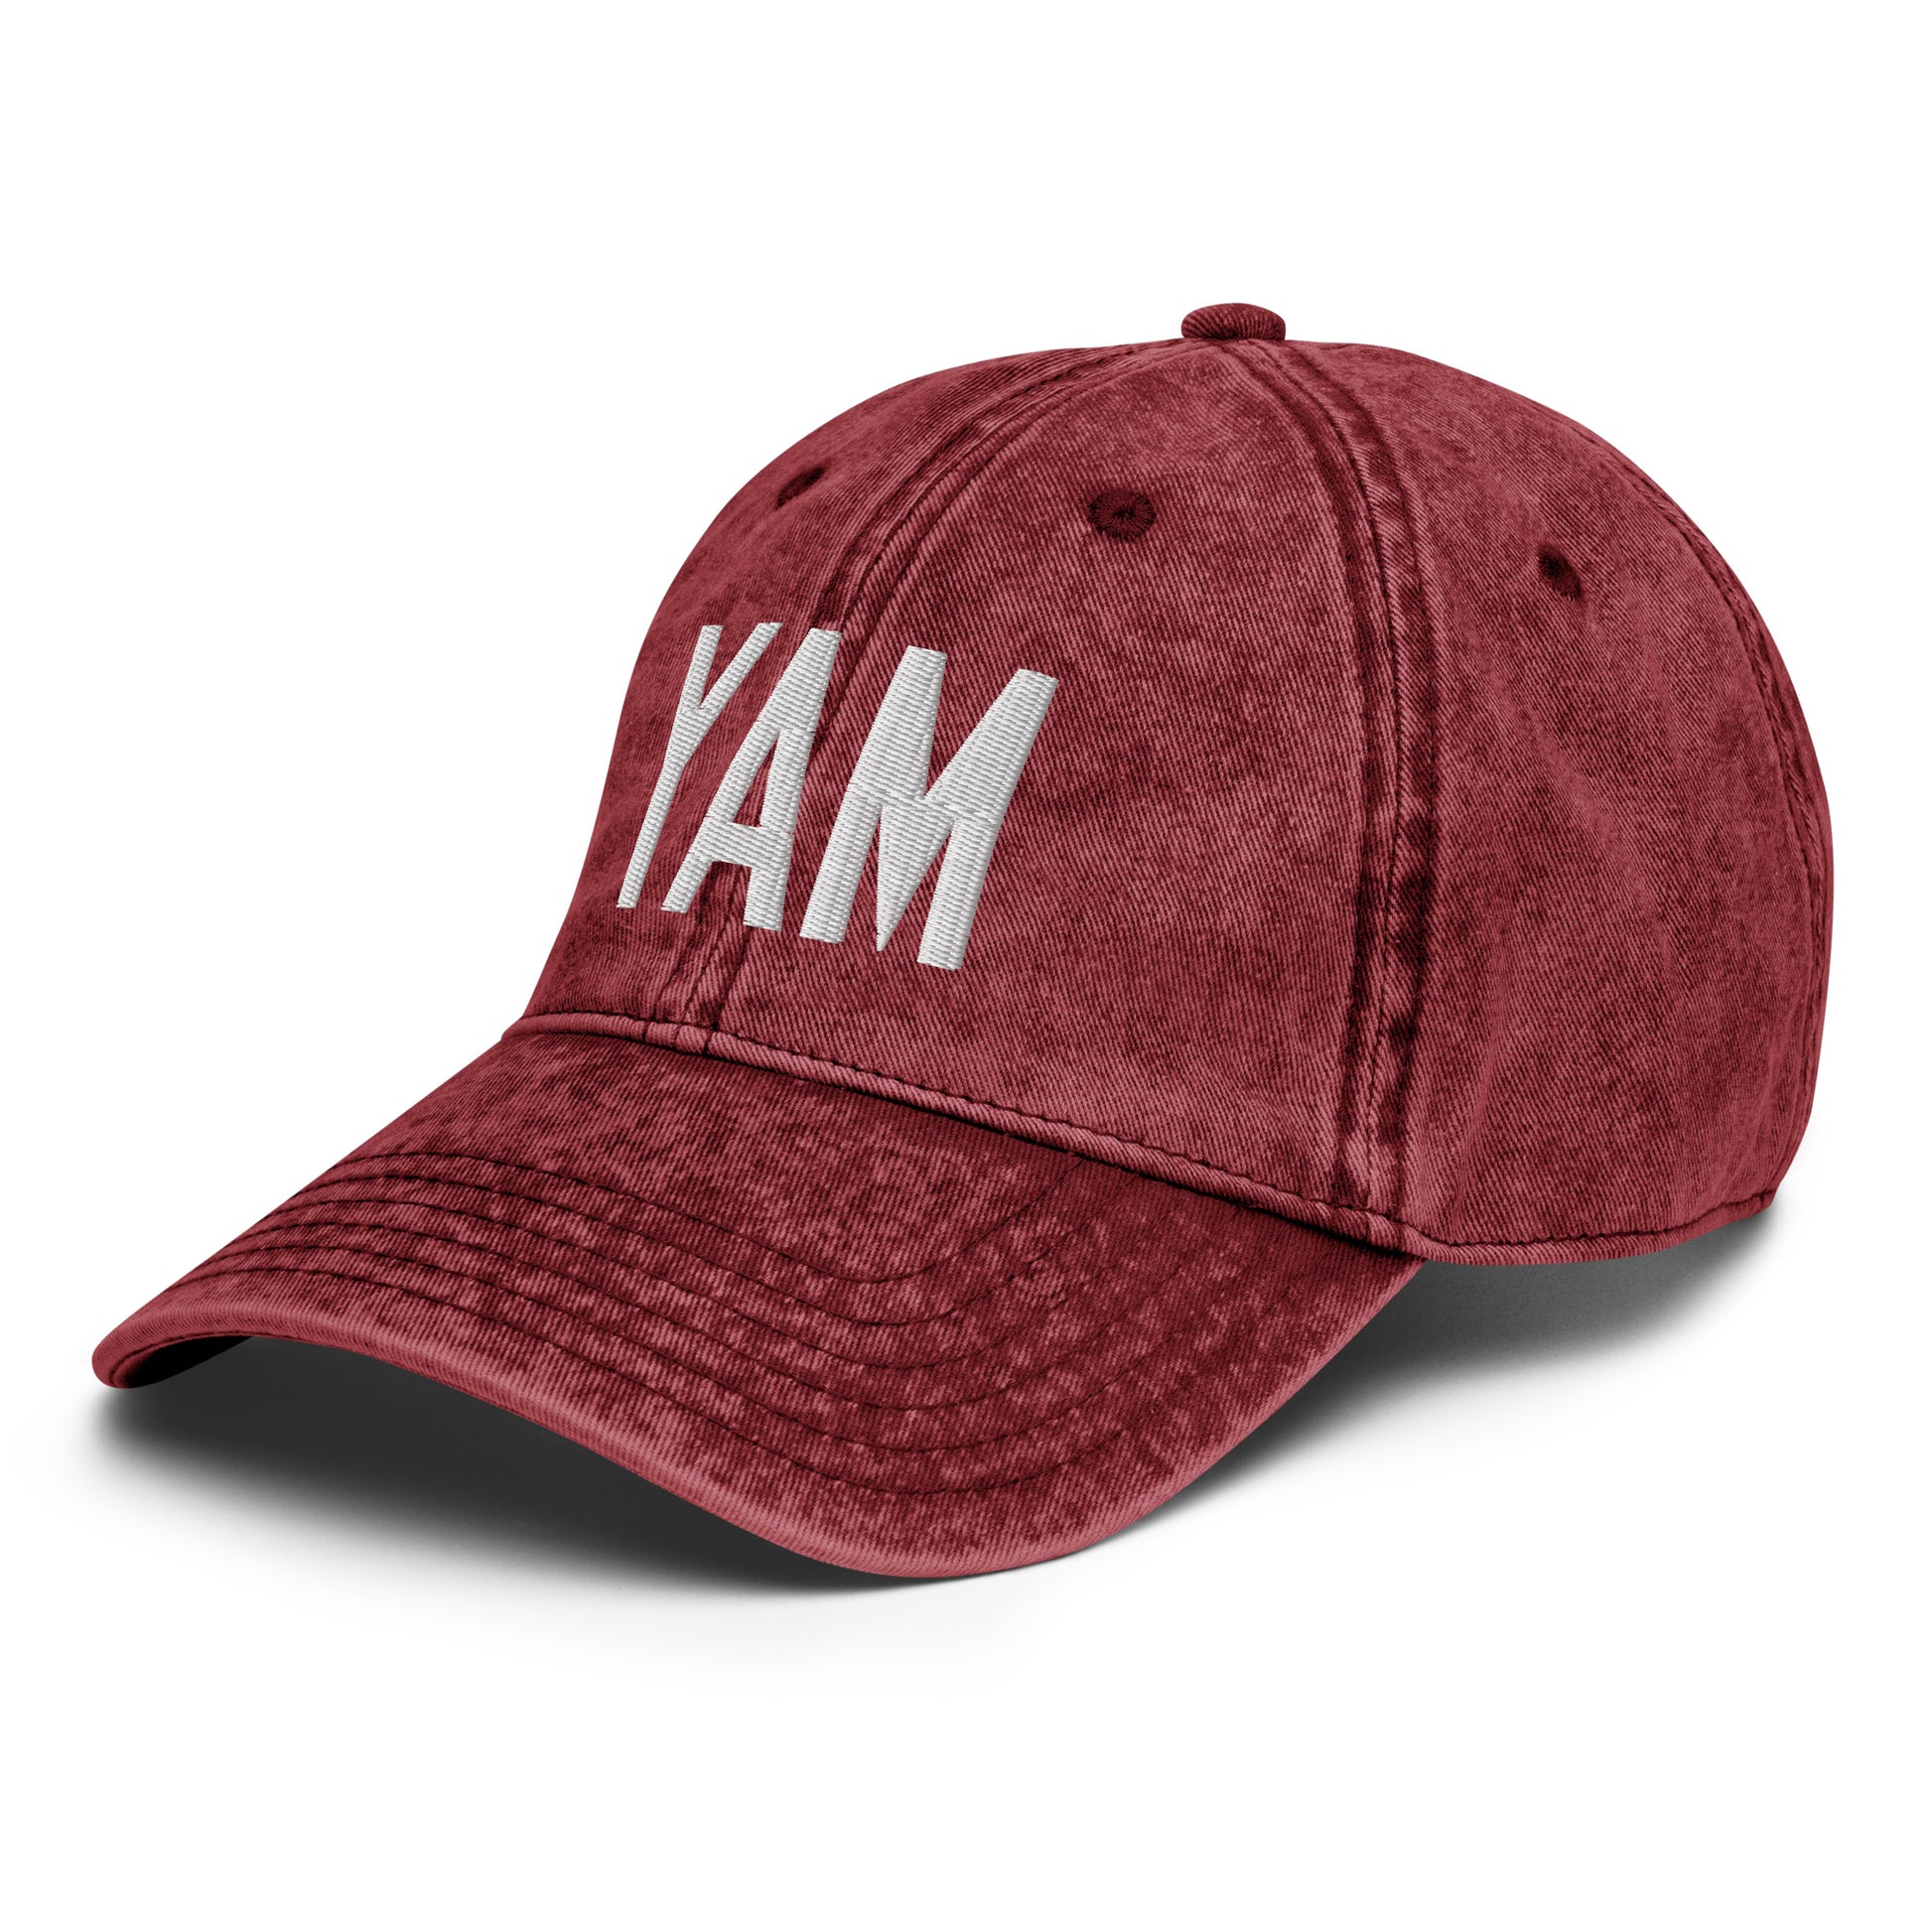 Airport Code Twill Cap - White • YAM Sault-Ste-Marie • YHM Designs - Image 20